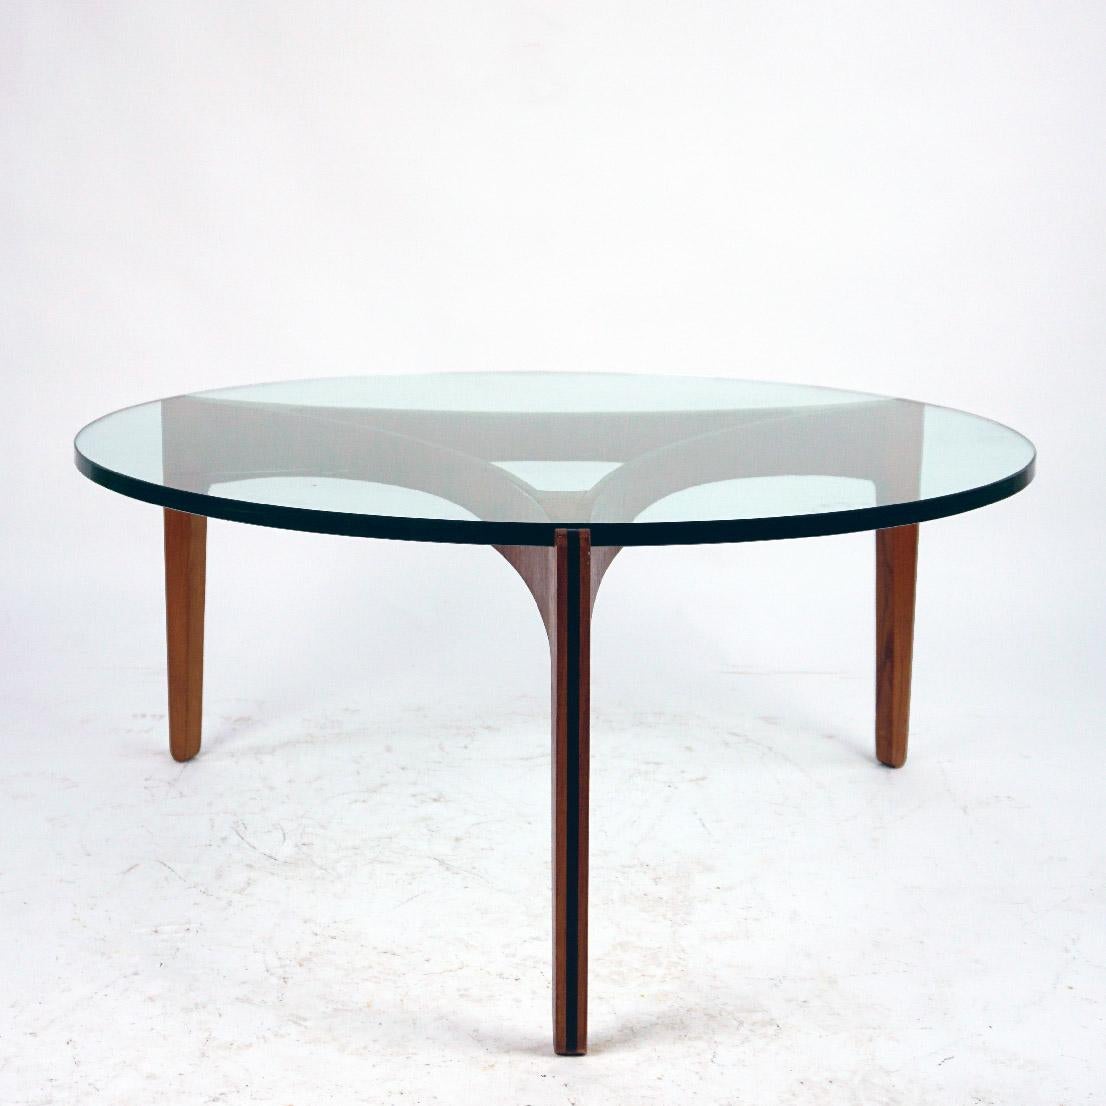 This Stunning circular coffee table model 104 was designed by Sven Ellekaer for Chirstian Linneberg, Denmark 1962. This exquisite coffee table is composed of a beautiful elegant bent teakwood base which supporting a thick transparent glass table